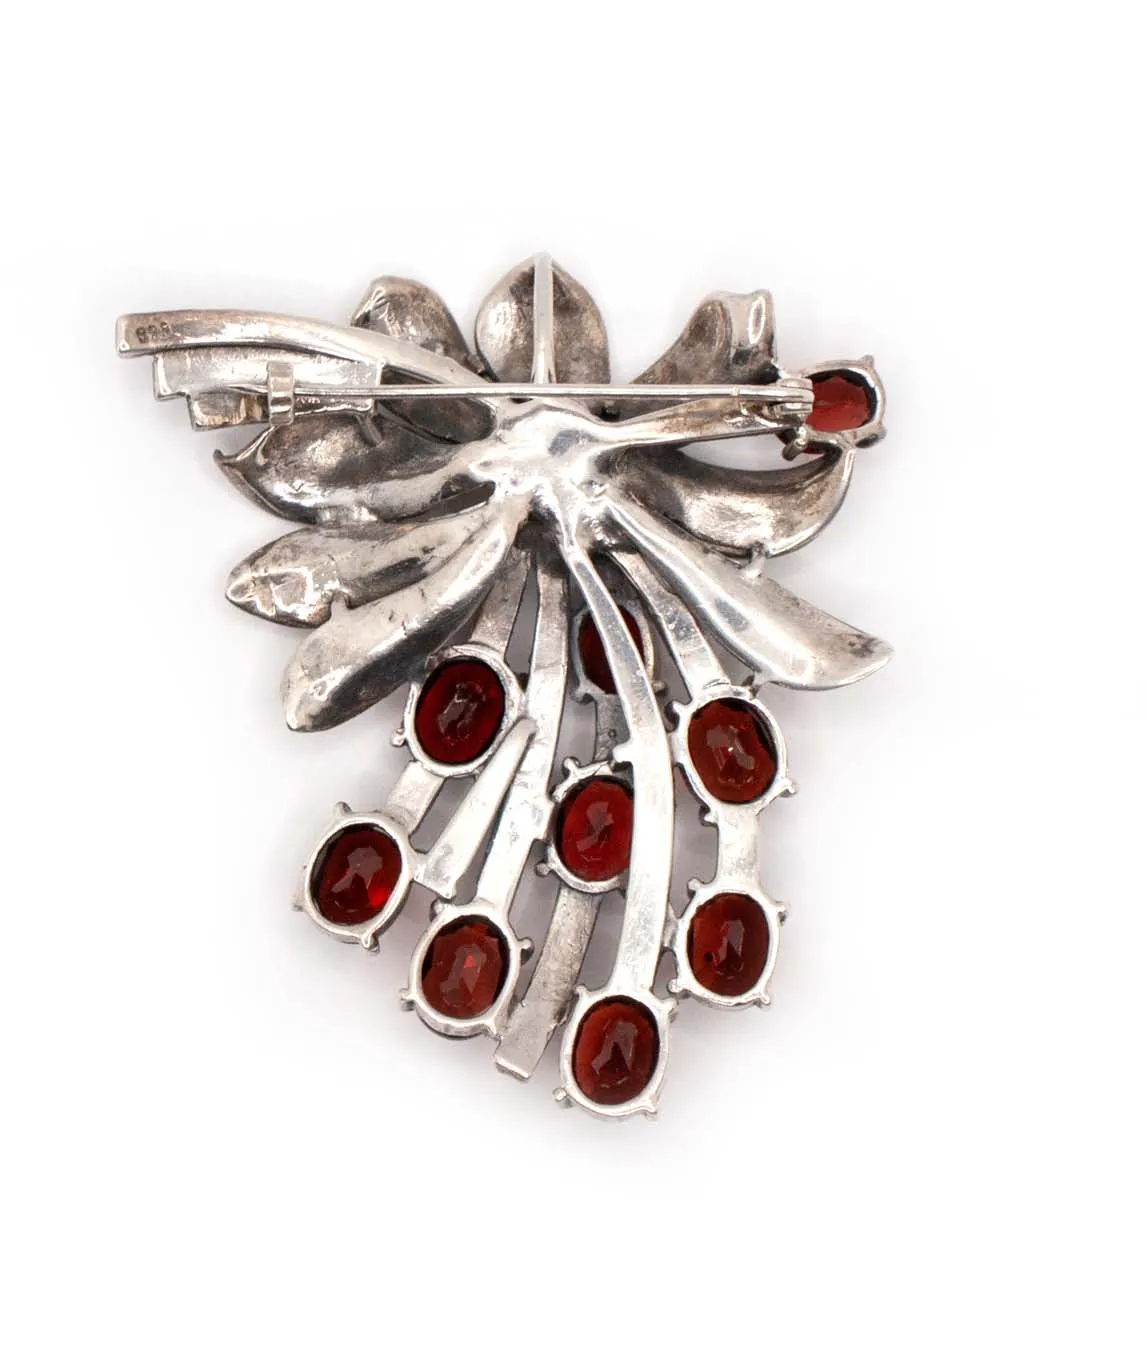 Back of 925 silver and marcasite brooch with garnet red paste stones